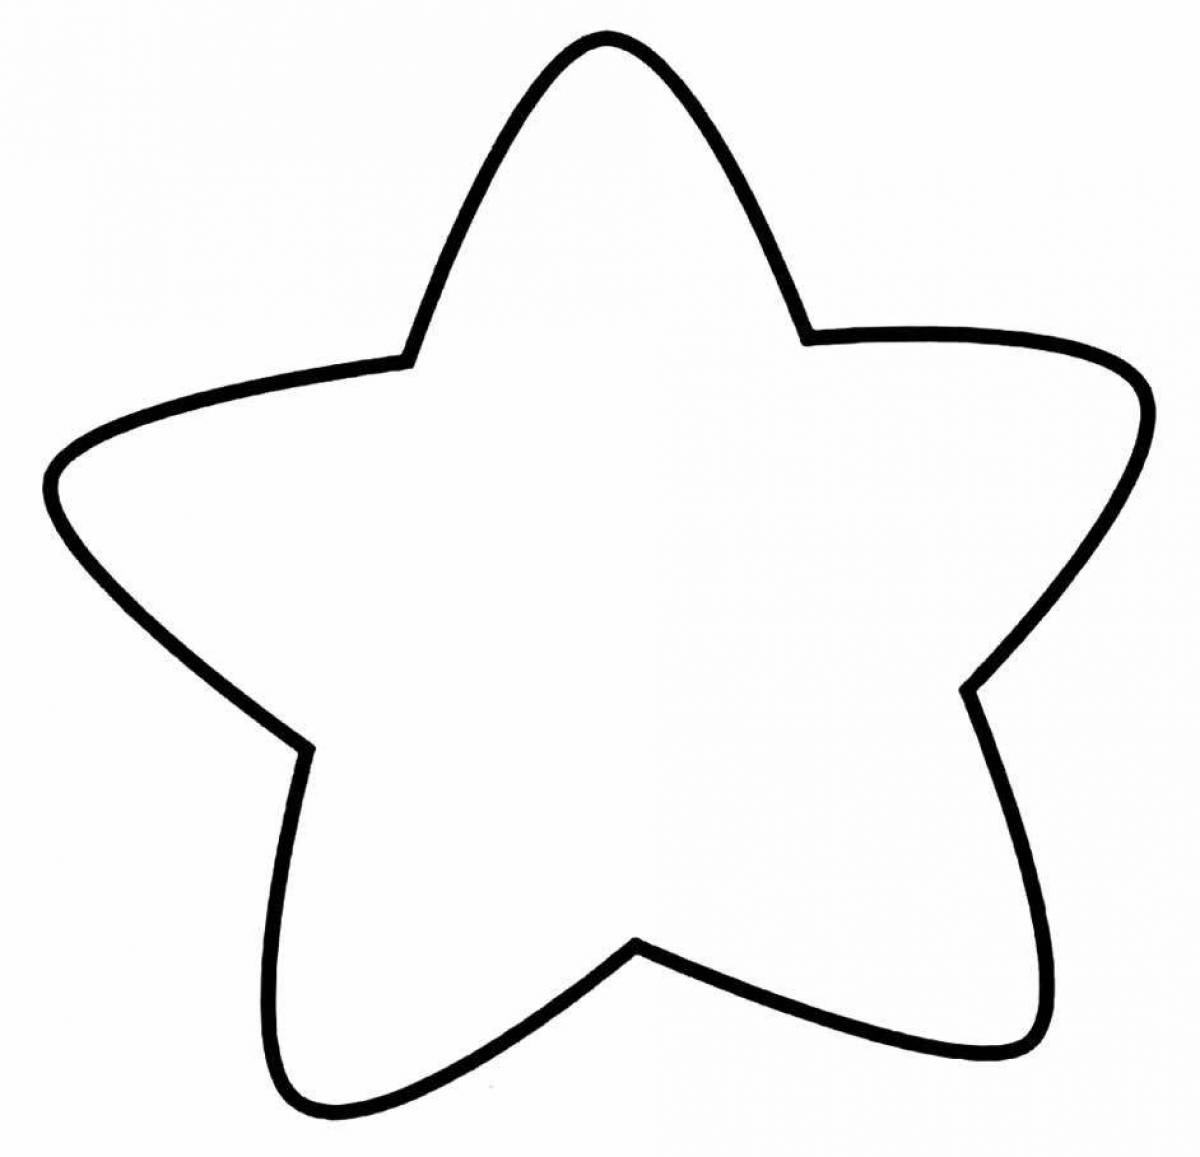 Shine baby star coloring book